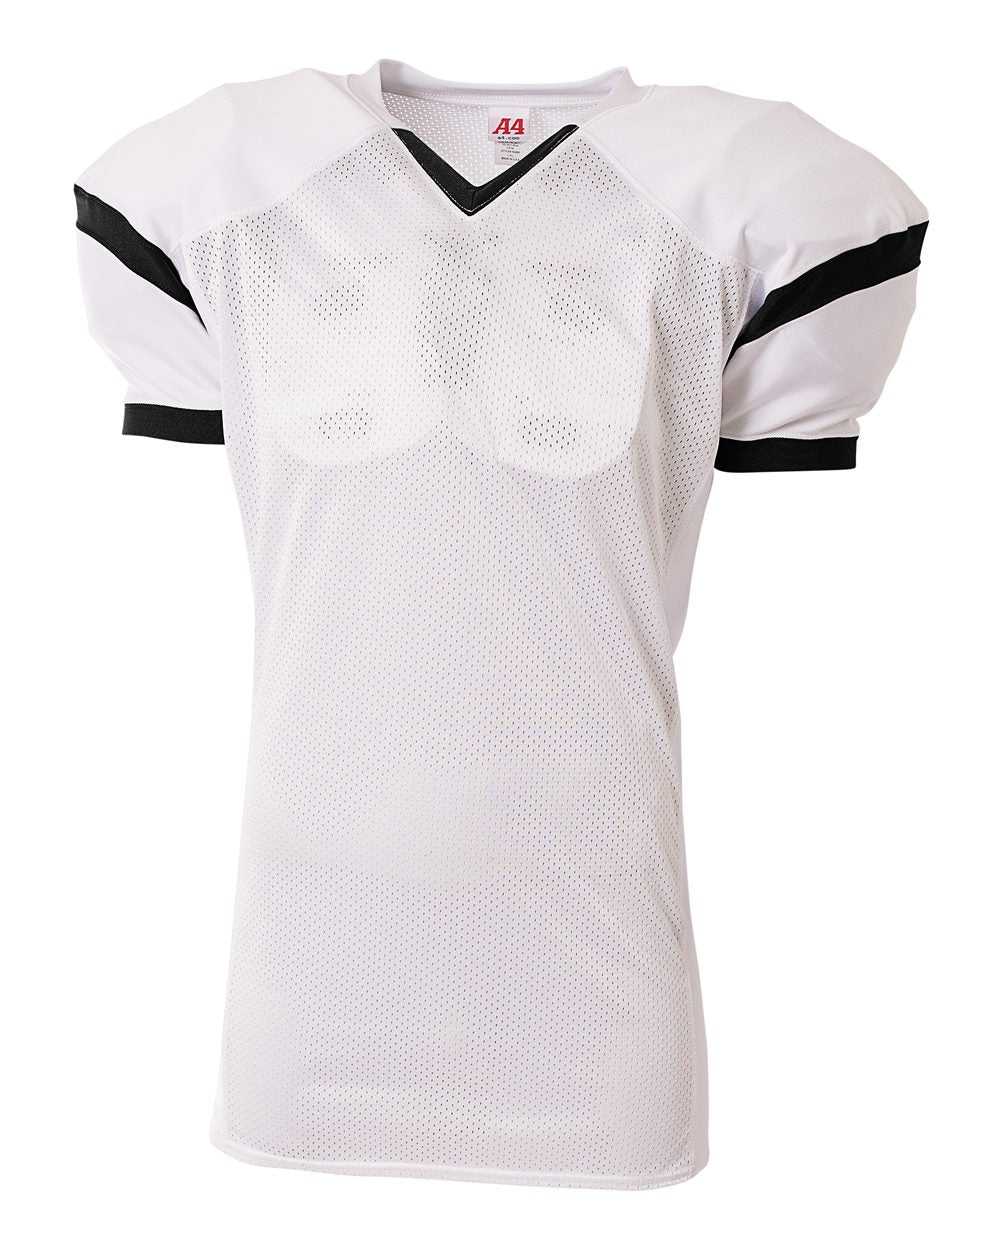 A4 N4265 The Rollout Football Jersey - White Black - HIT a Double